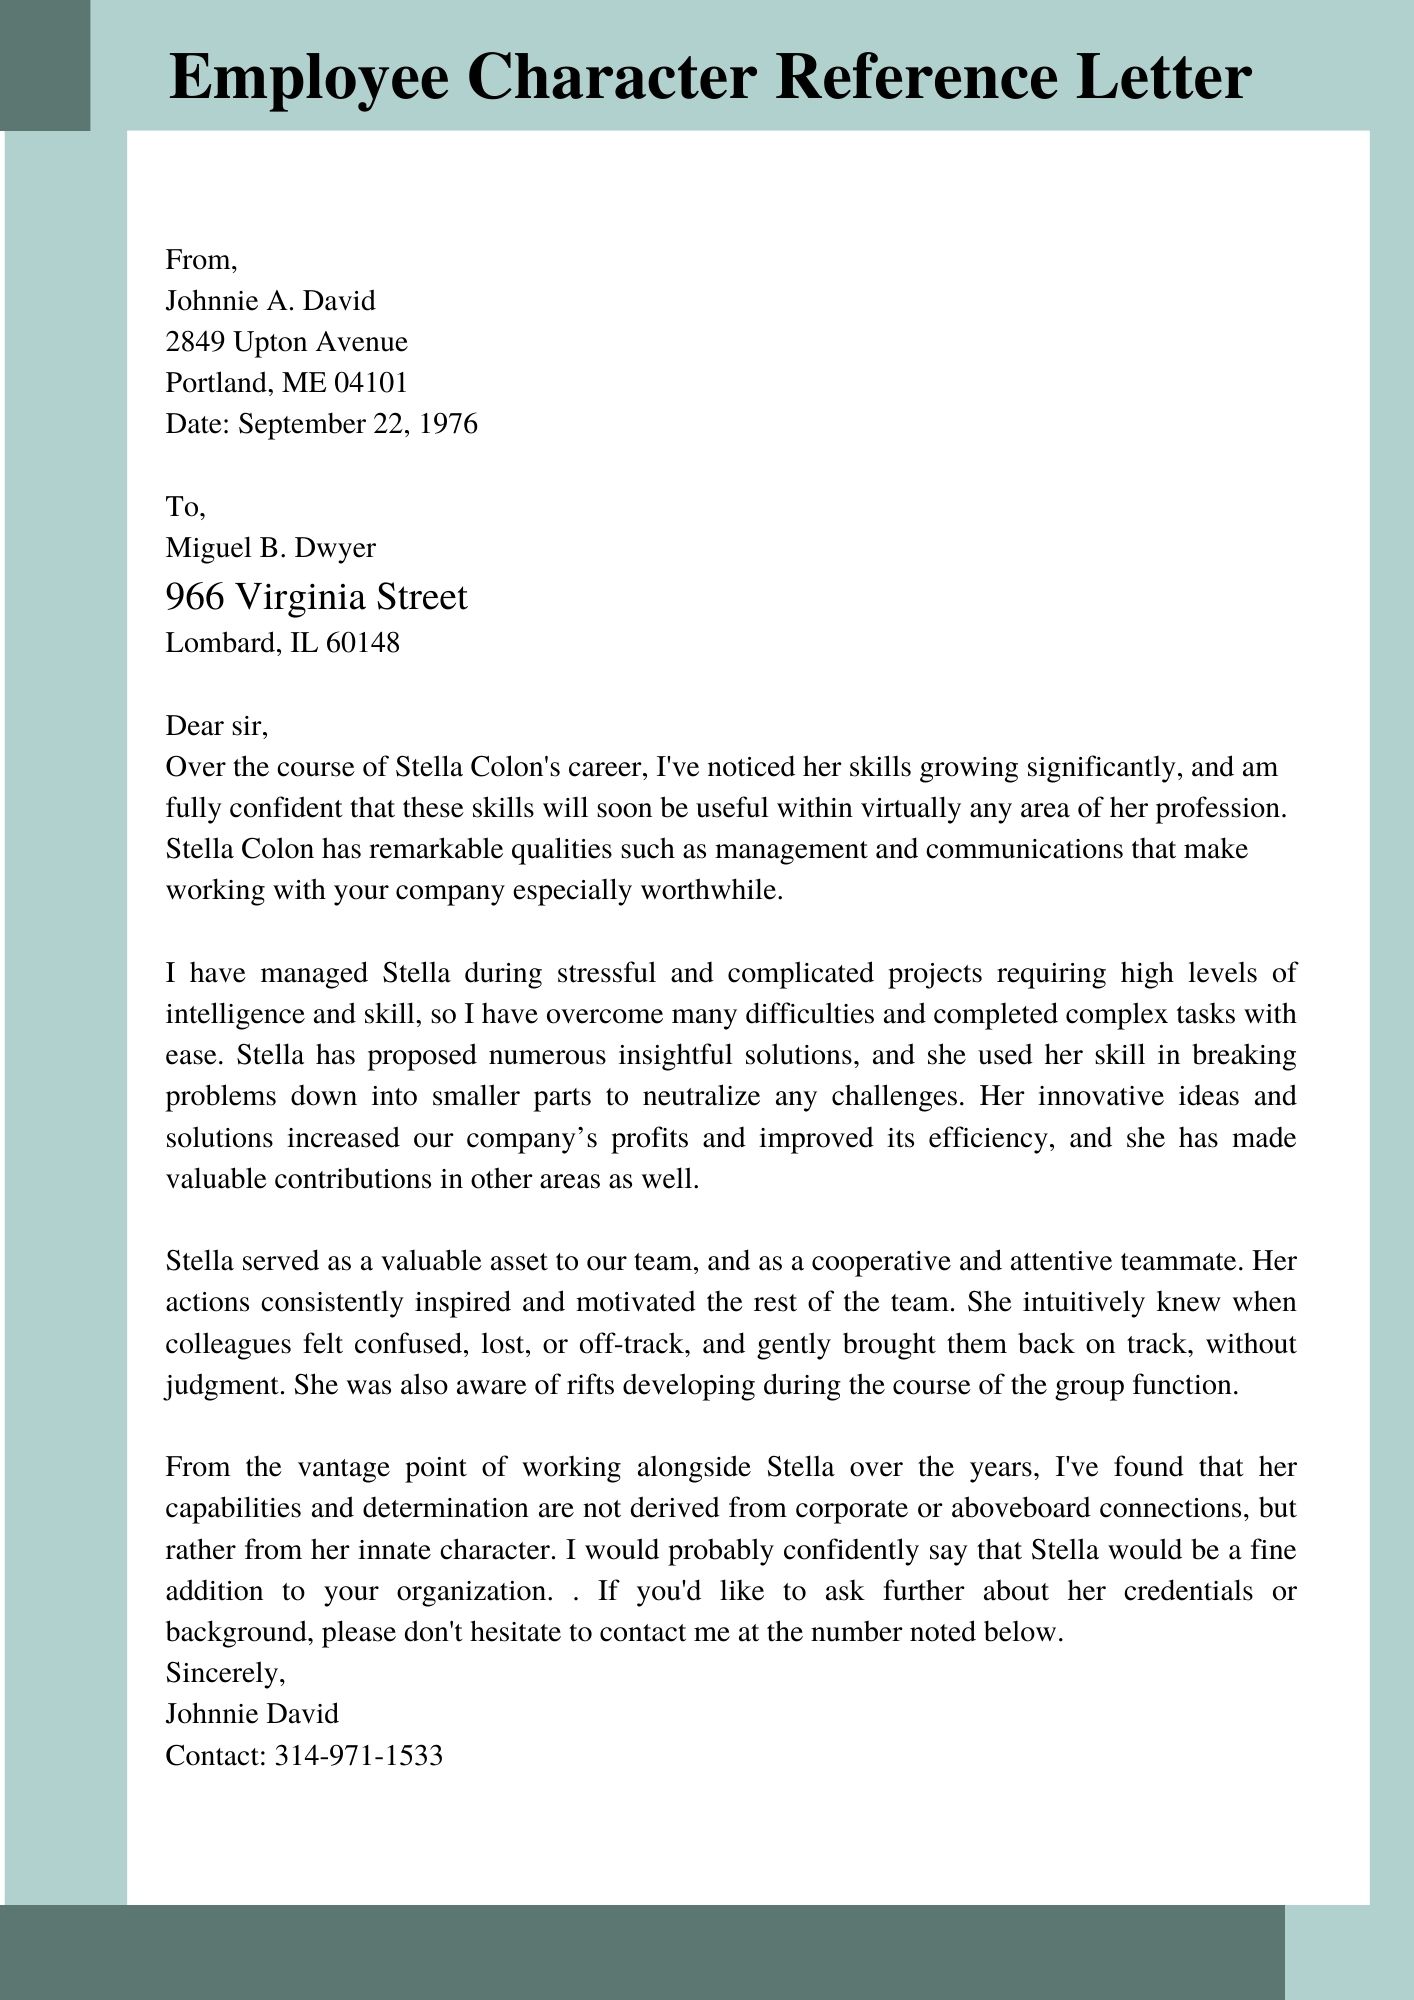 Employee Character Reference Letter